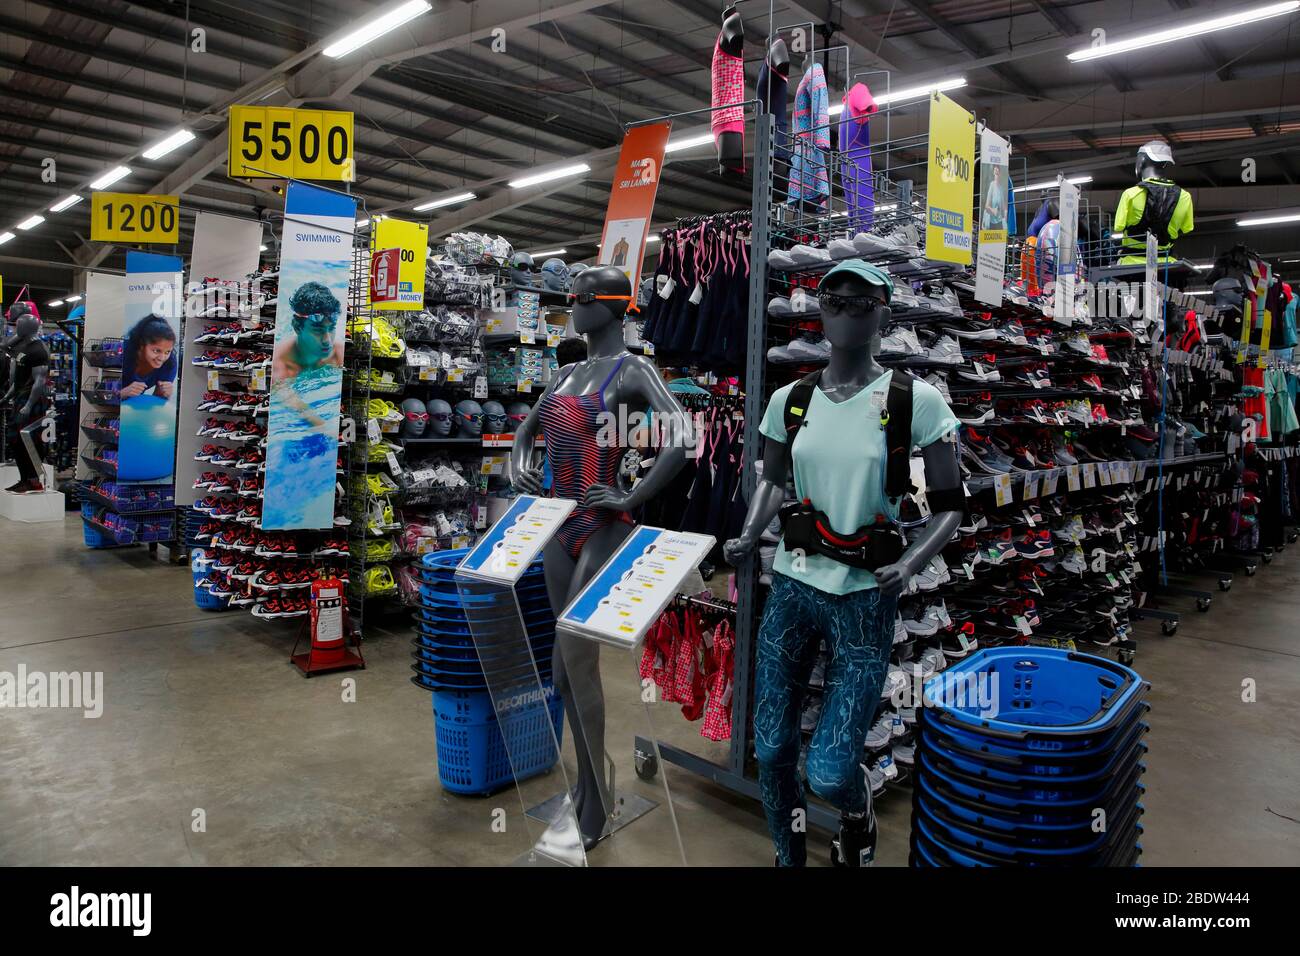 Page 5 - Decathlon France High Resolution Stock Photography and Images -  Alamy